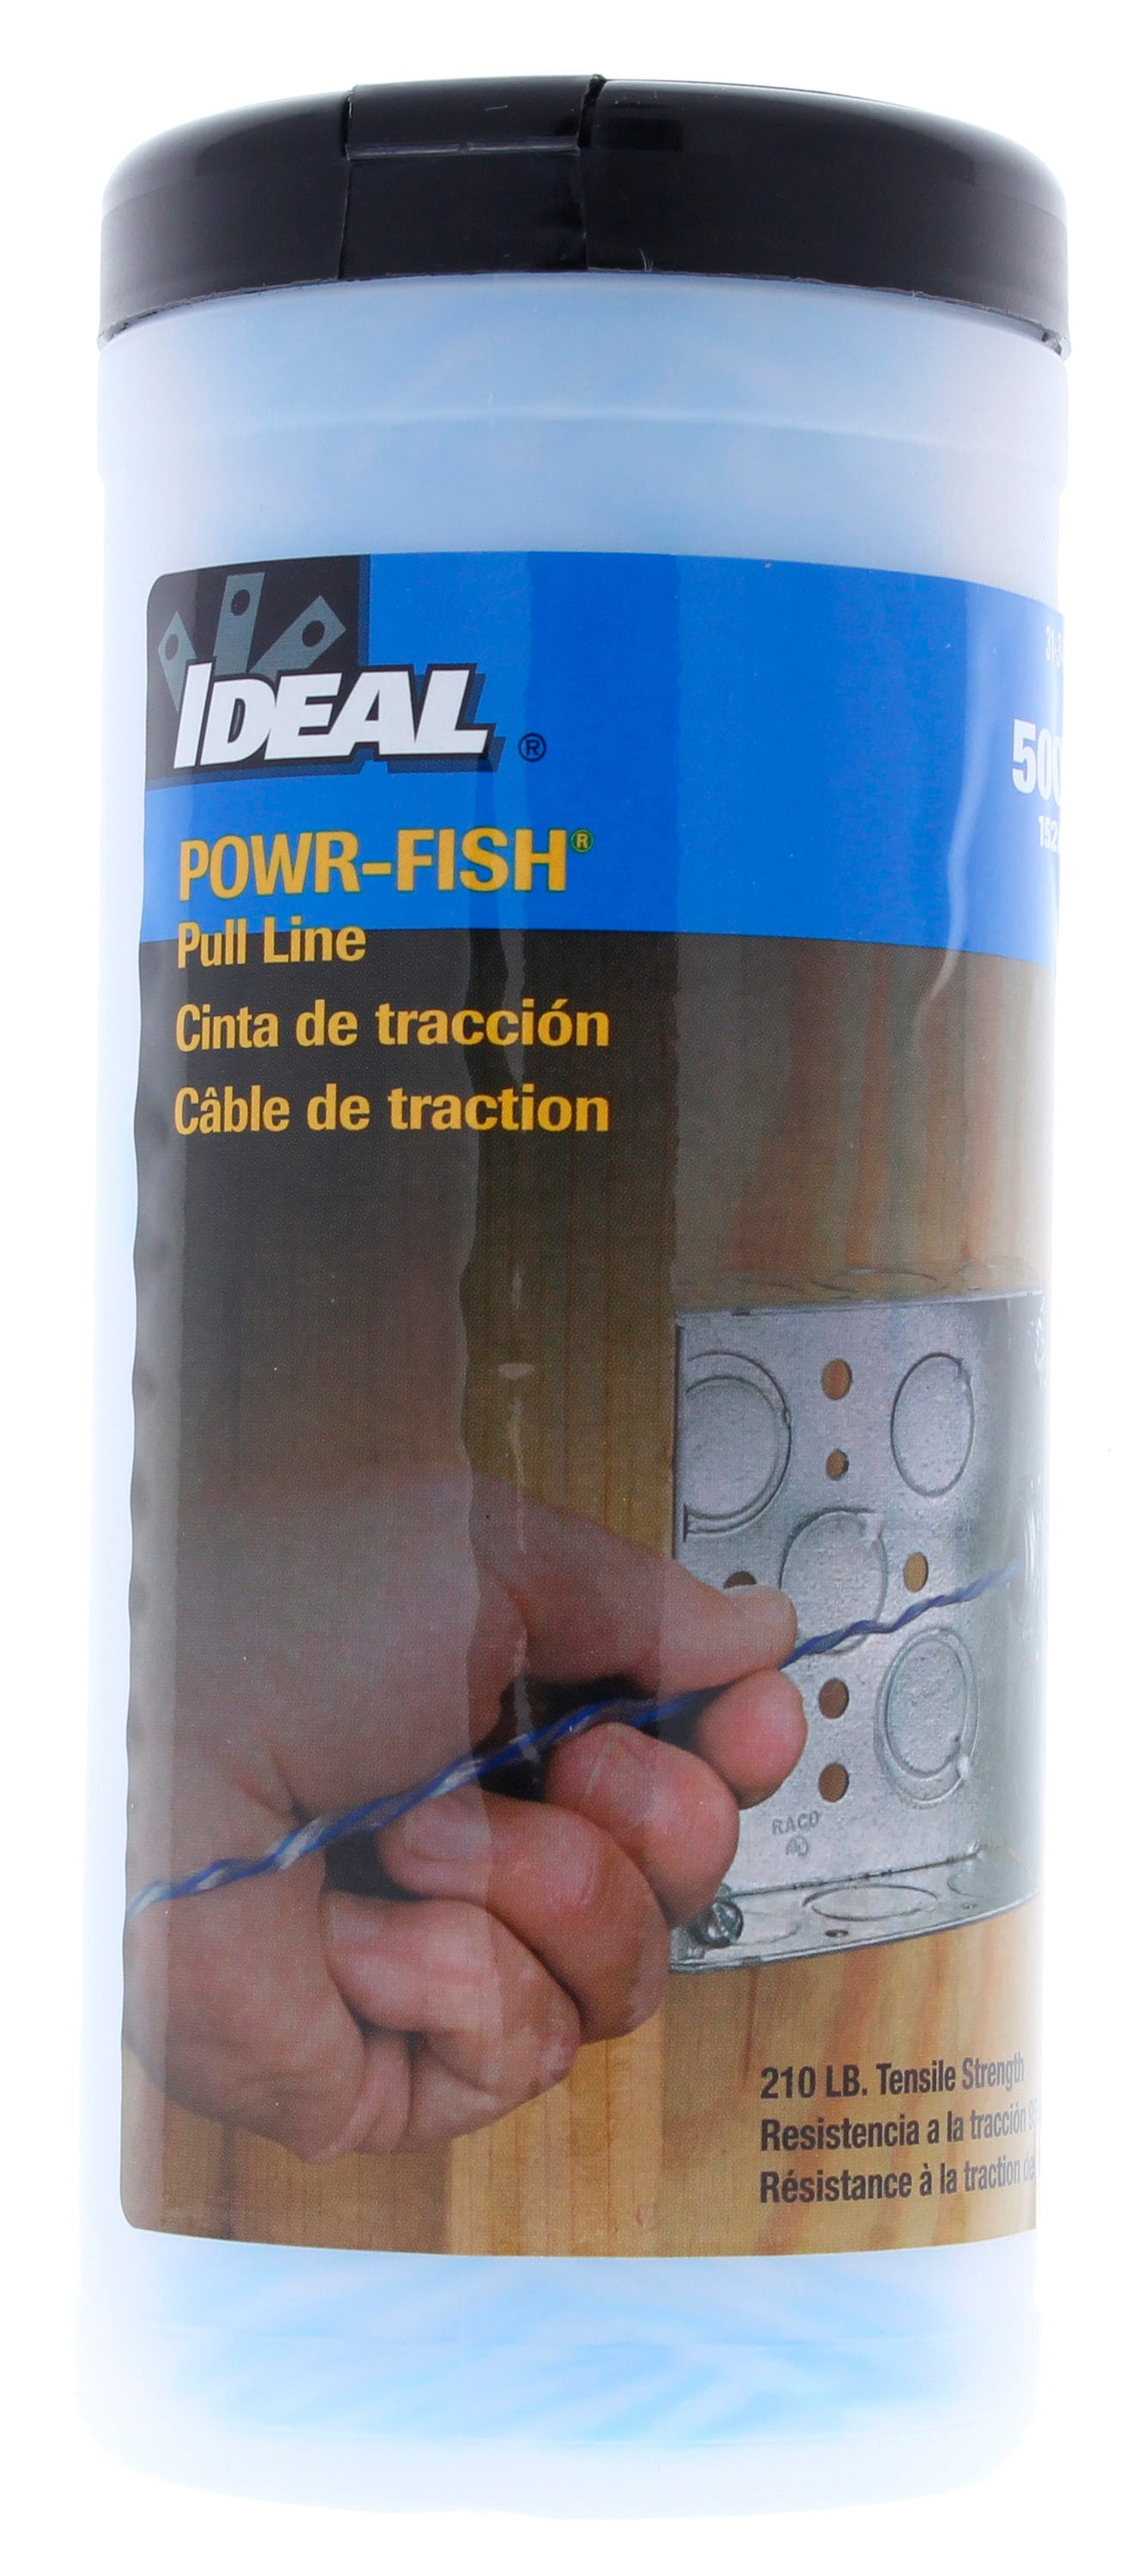 Eagle Tool US ETF25016 Wire and Cable Installer Fiberglass Fish Rod Kit 16-Foot 